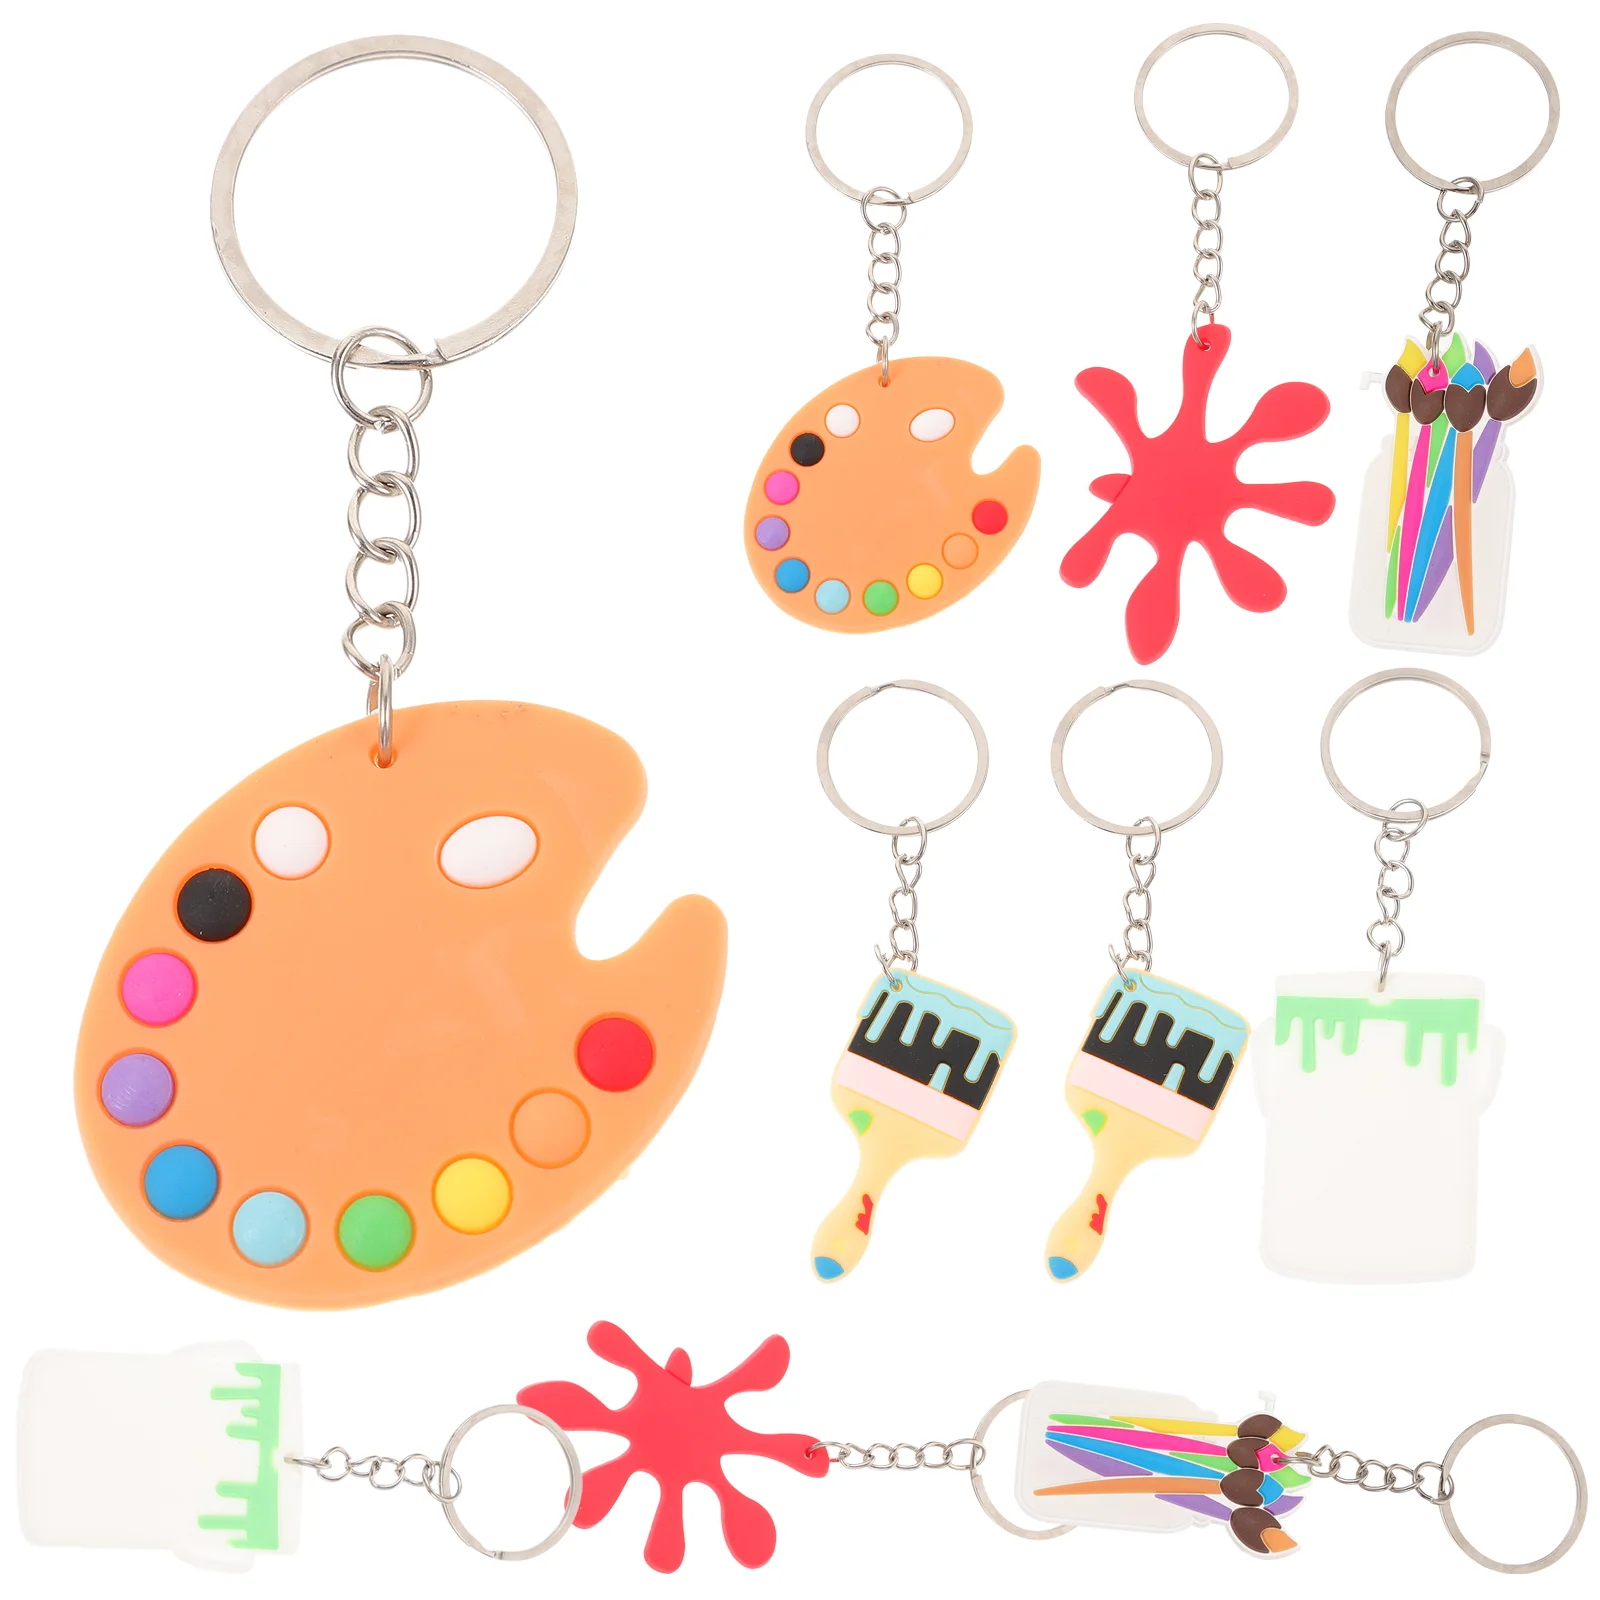 

10 Pcs Artist Key Ornament Keys Hanging Accessories Silicone Keychain The Gift Decorate Pvc Keychains Child